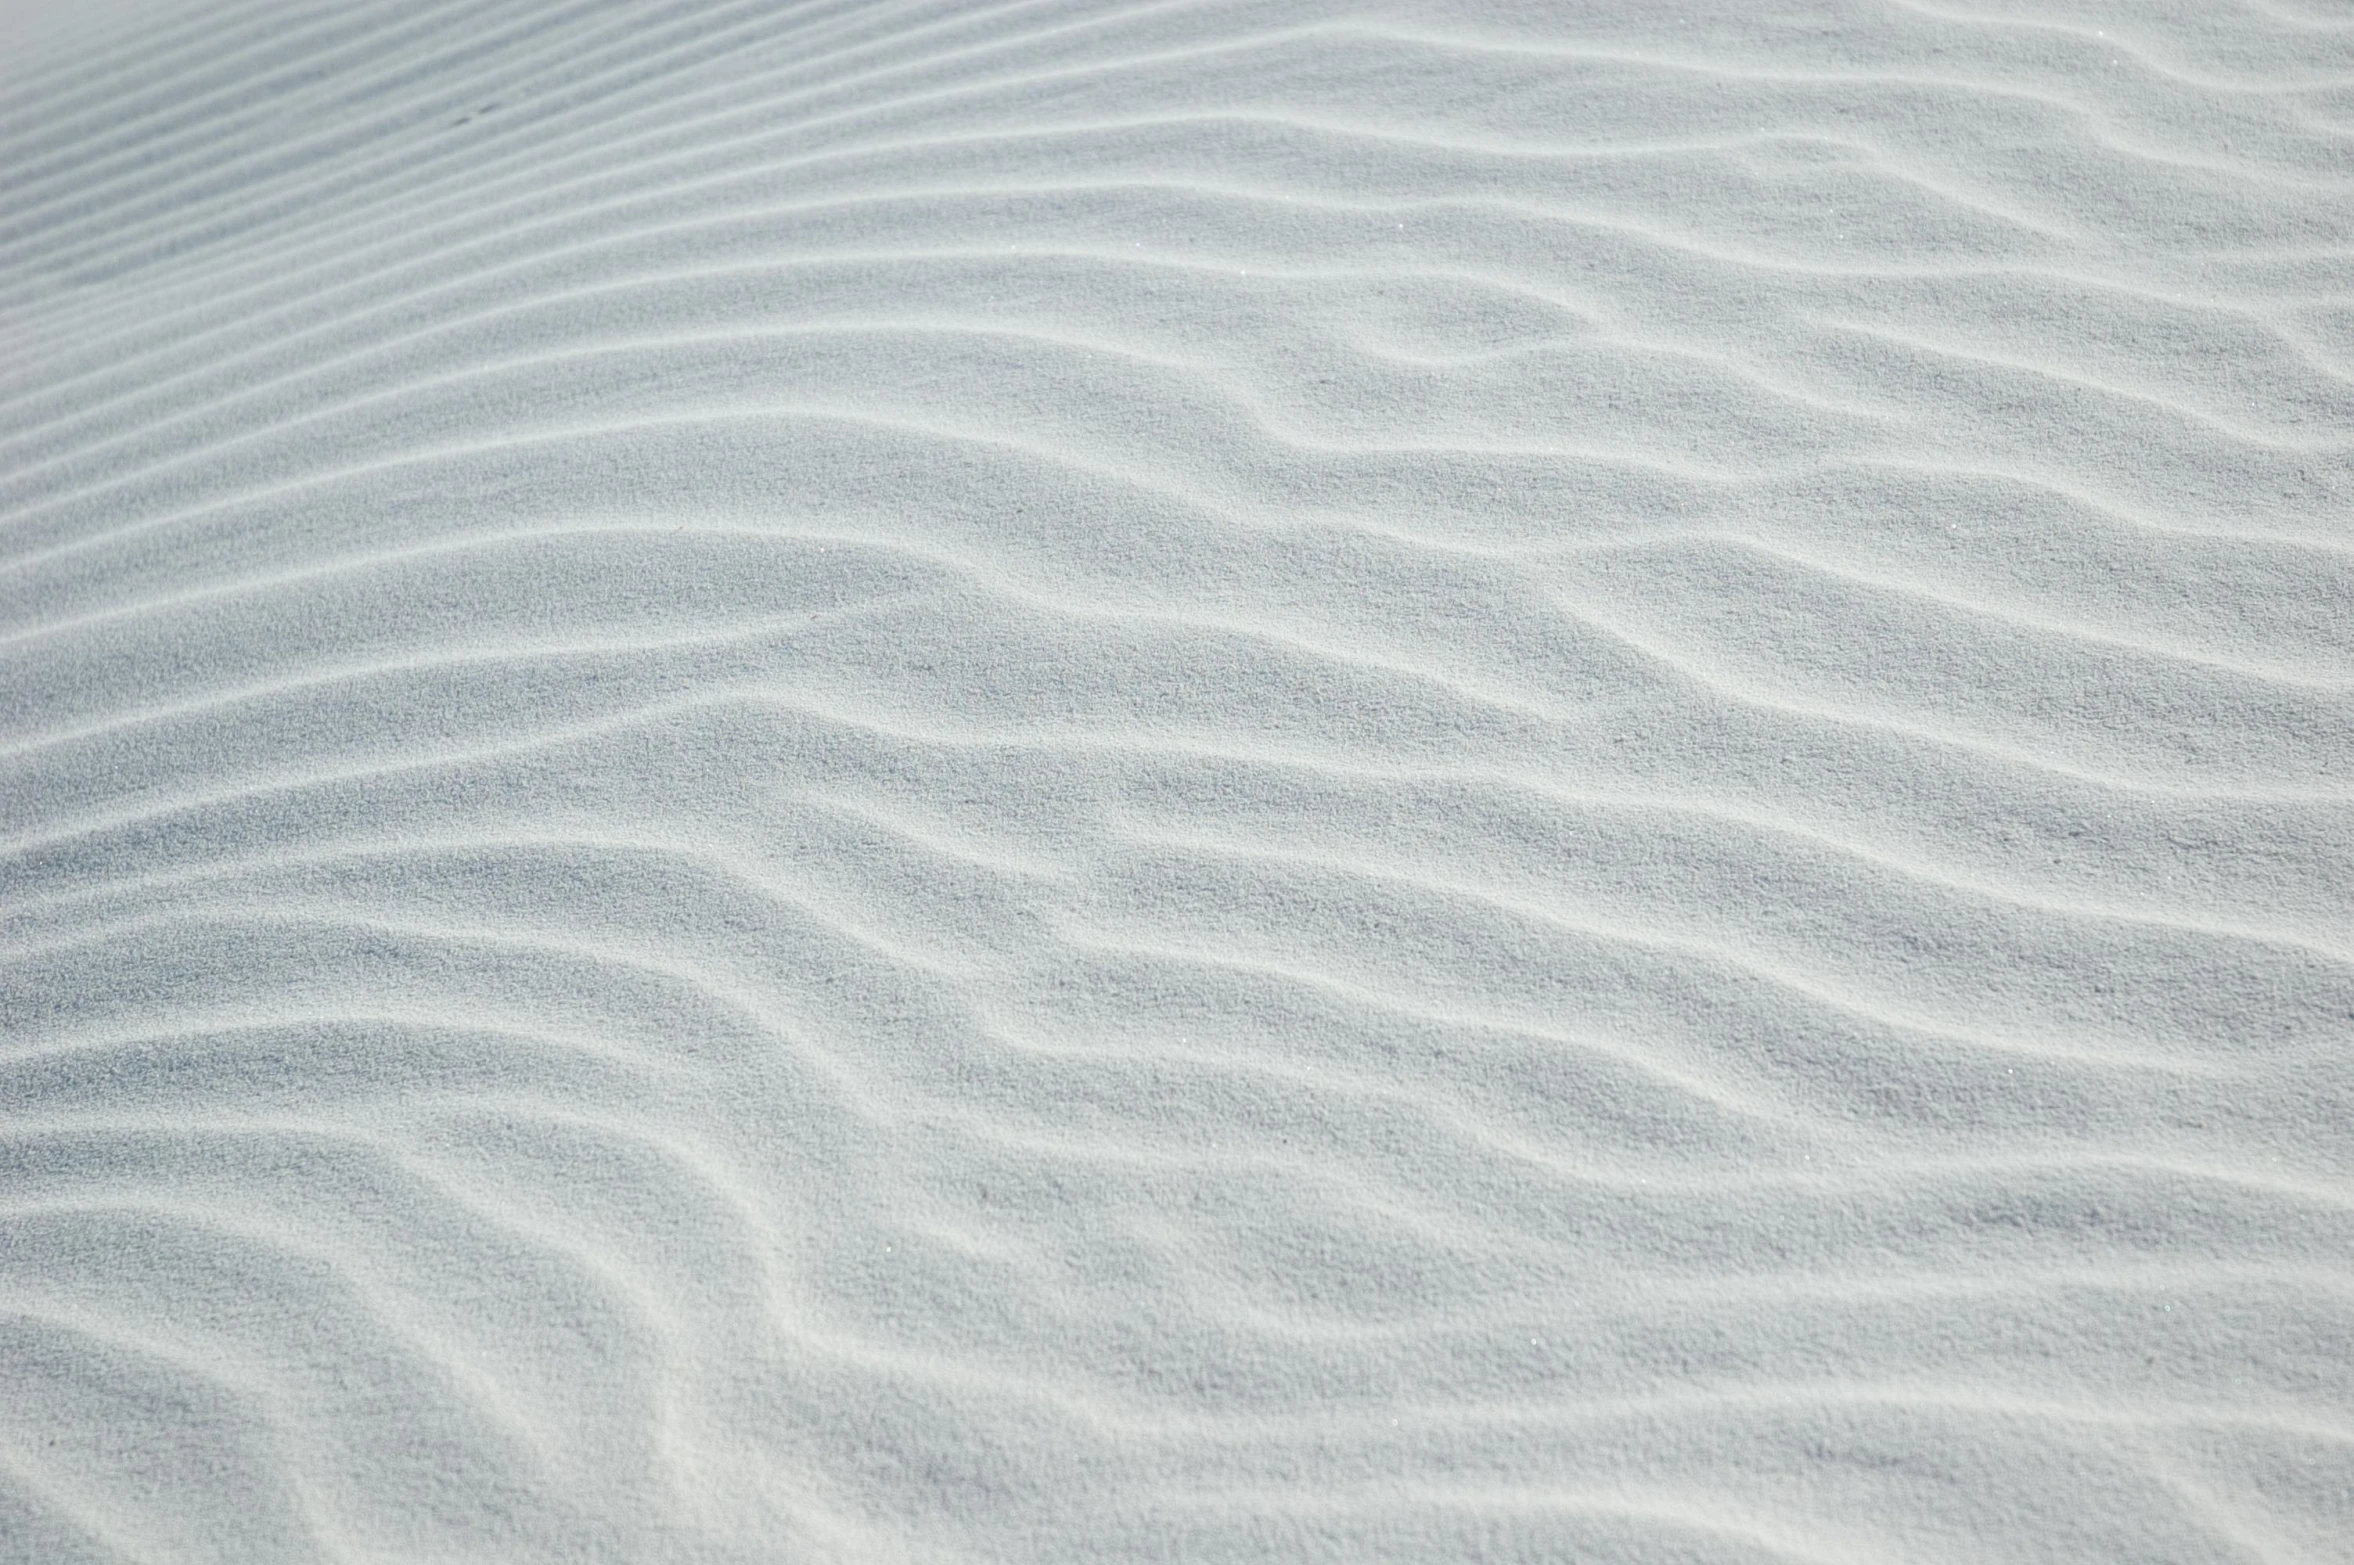 an image of ripples or waves on the sand